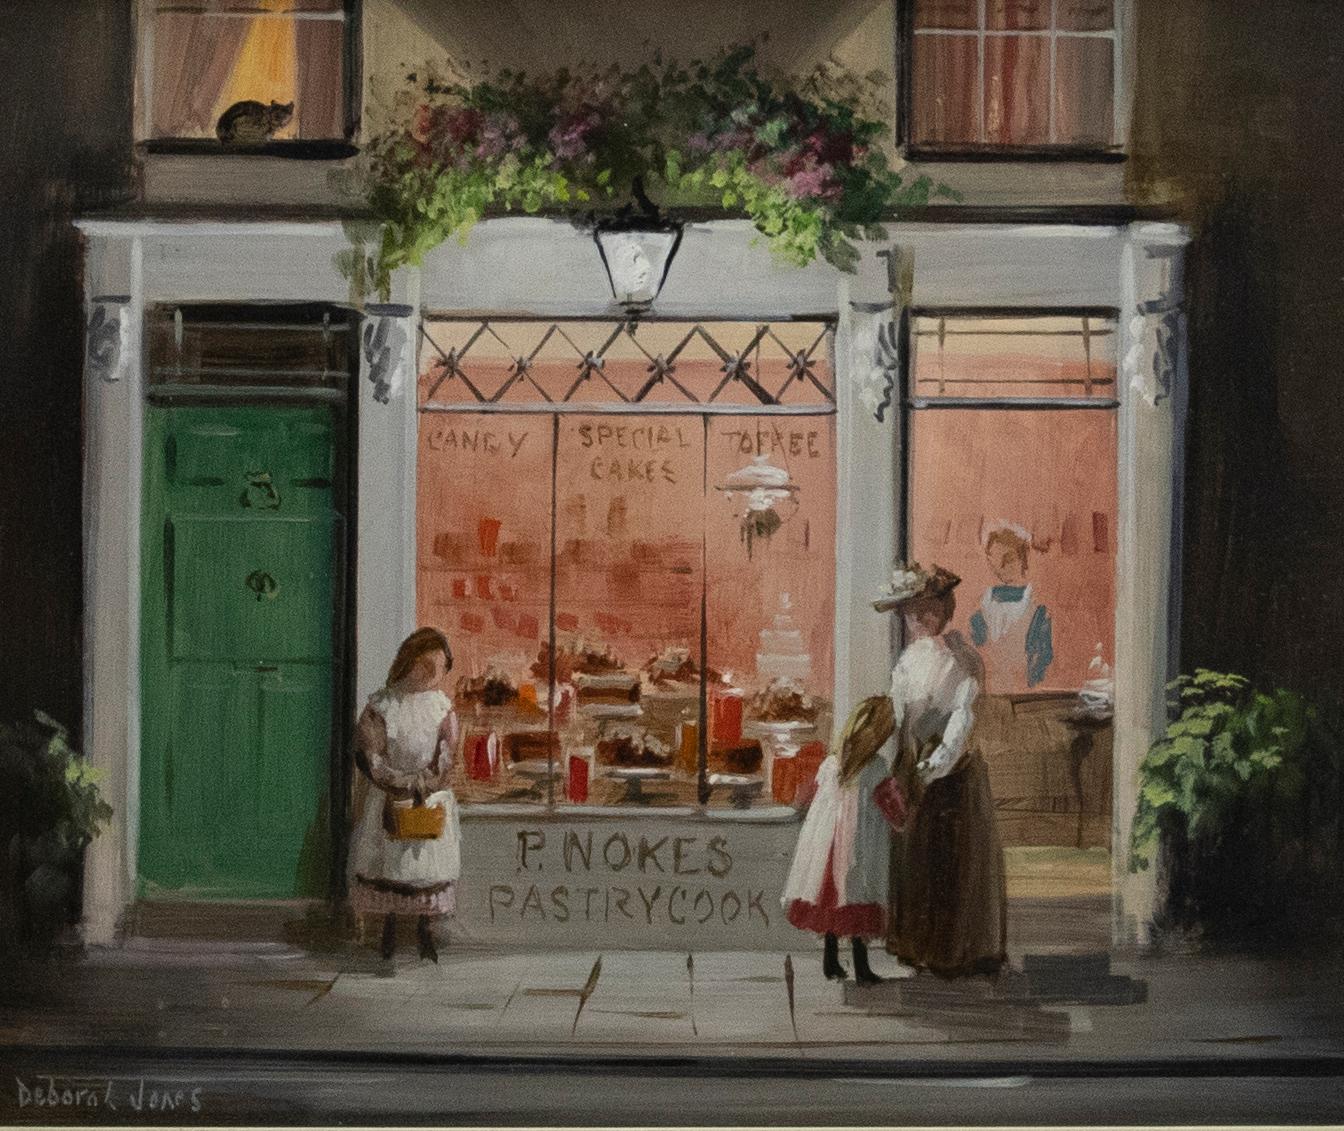 A charming 20th century street scene in oil, showing an Edwardian pastry shop with magnificent window display. Figures can be seen waiting at the door deliberating the many choices of cake and candy. The painting has been well-presented in an